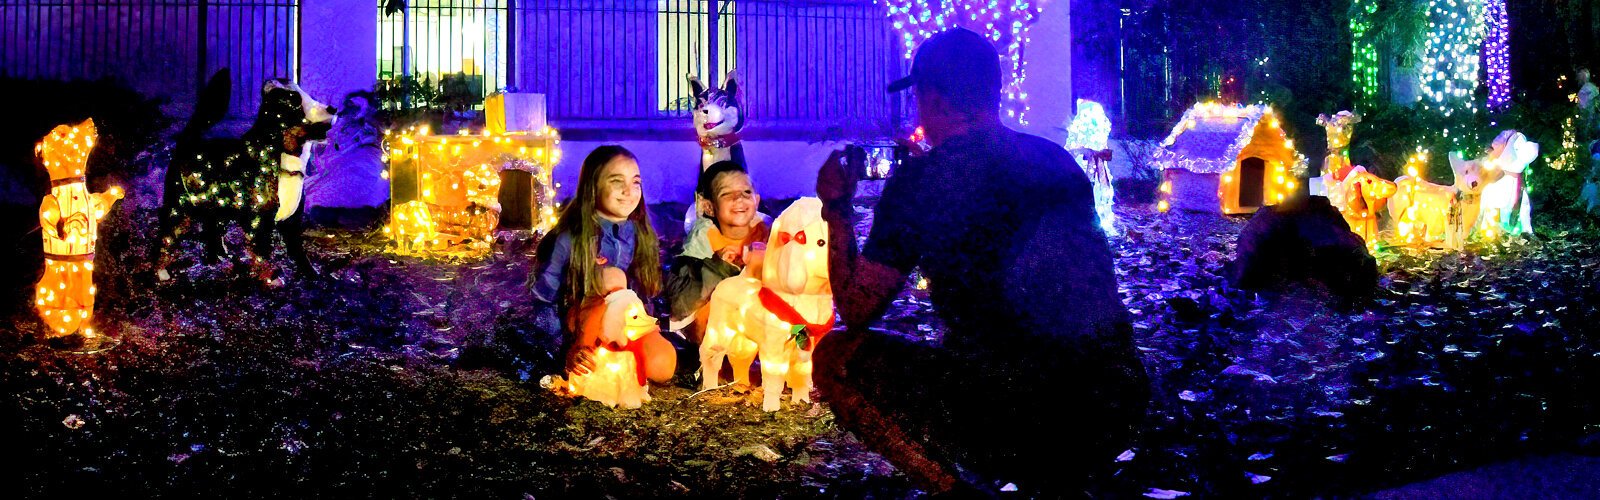 Soraya, 8, and Marek, 6, wanted to have their picture taken with the lighted figures of poodles at the Holiday Lights of the Florida Botanical Gardens.